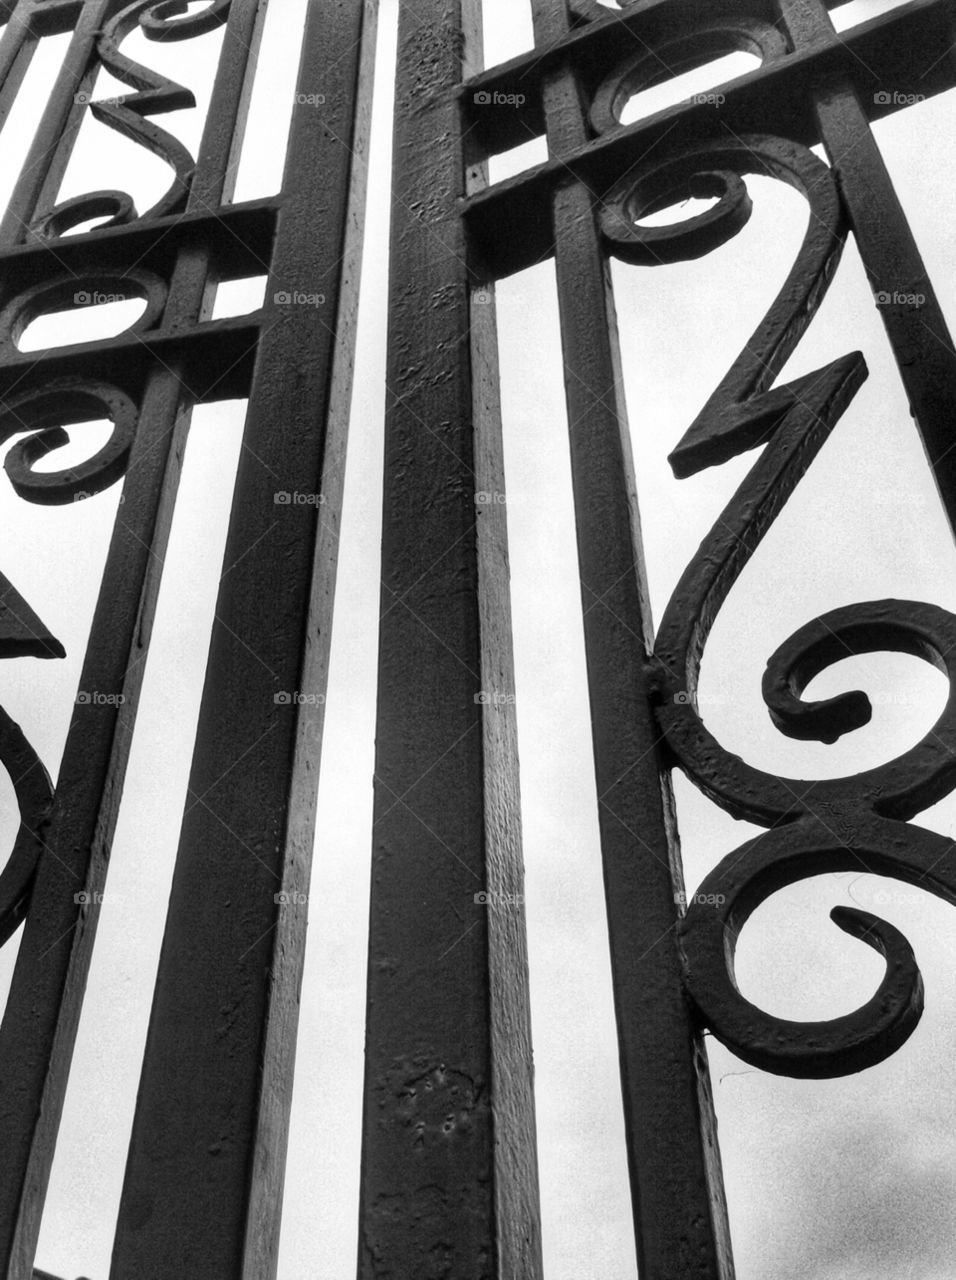 Close up of a wrought iron gate in black and white.